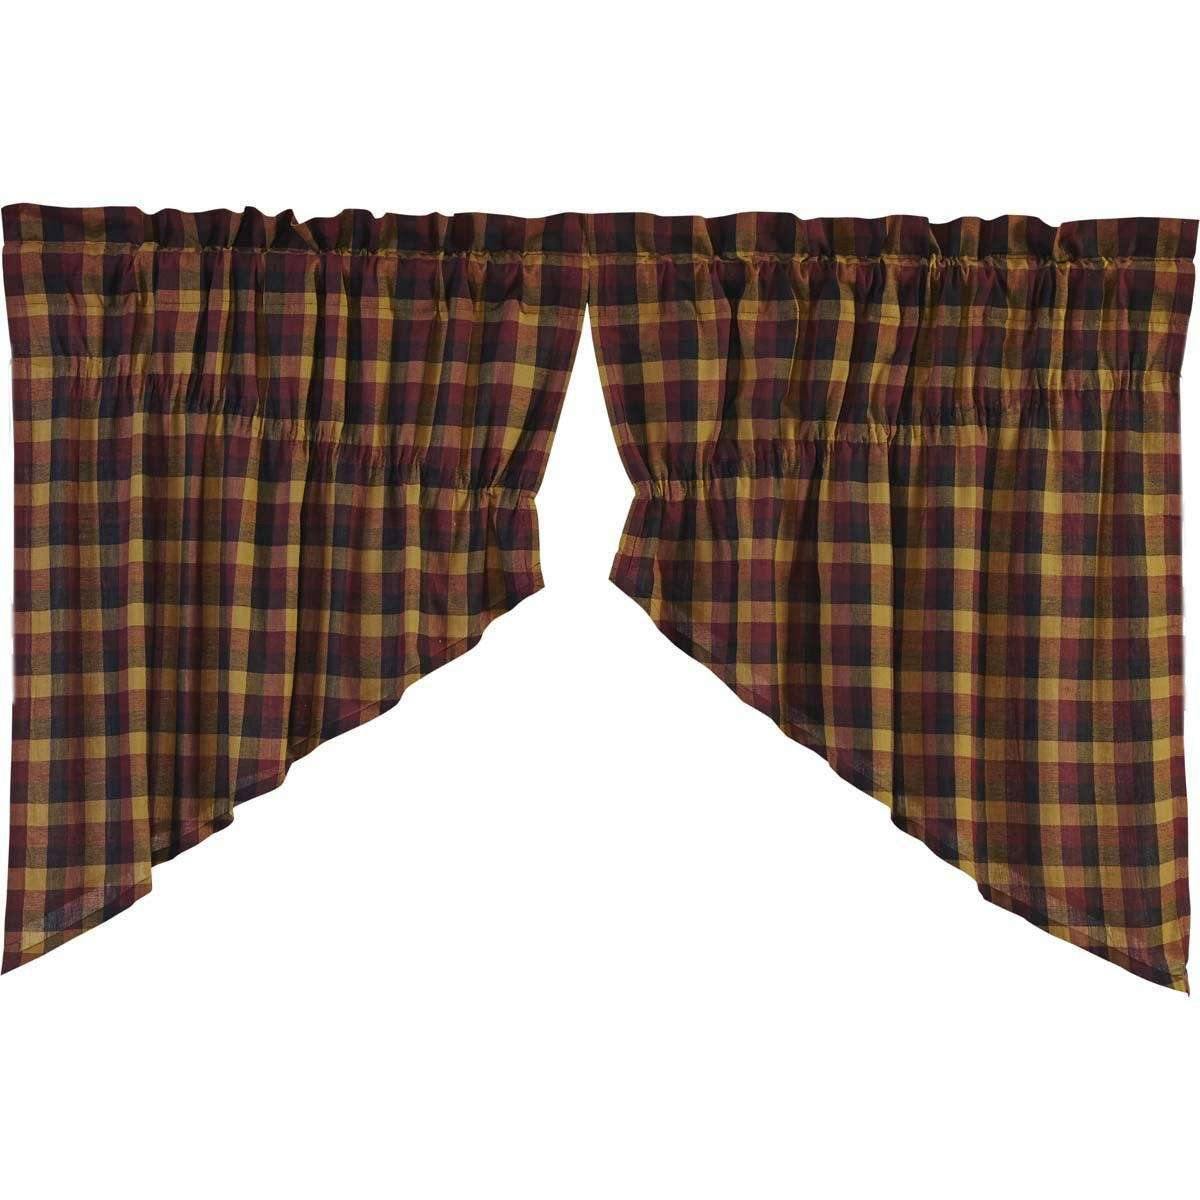 Heritage Farms Primitive Check Prairie Swag Curtain Set of 2 36x36x18 VHC Brands online